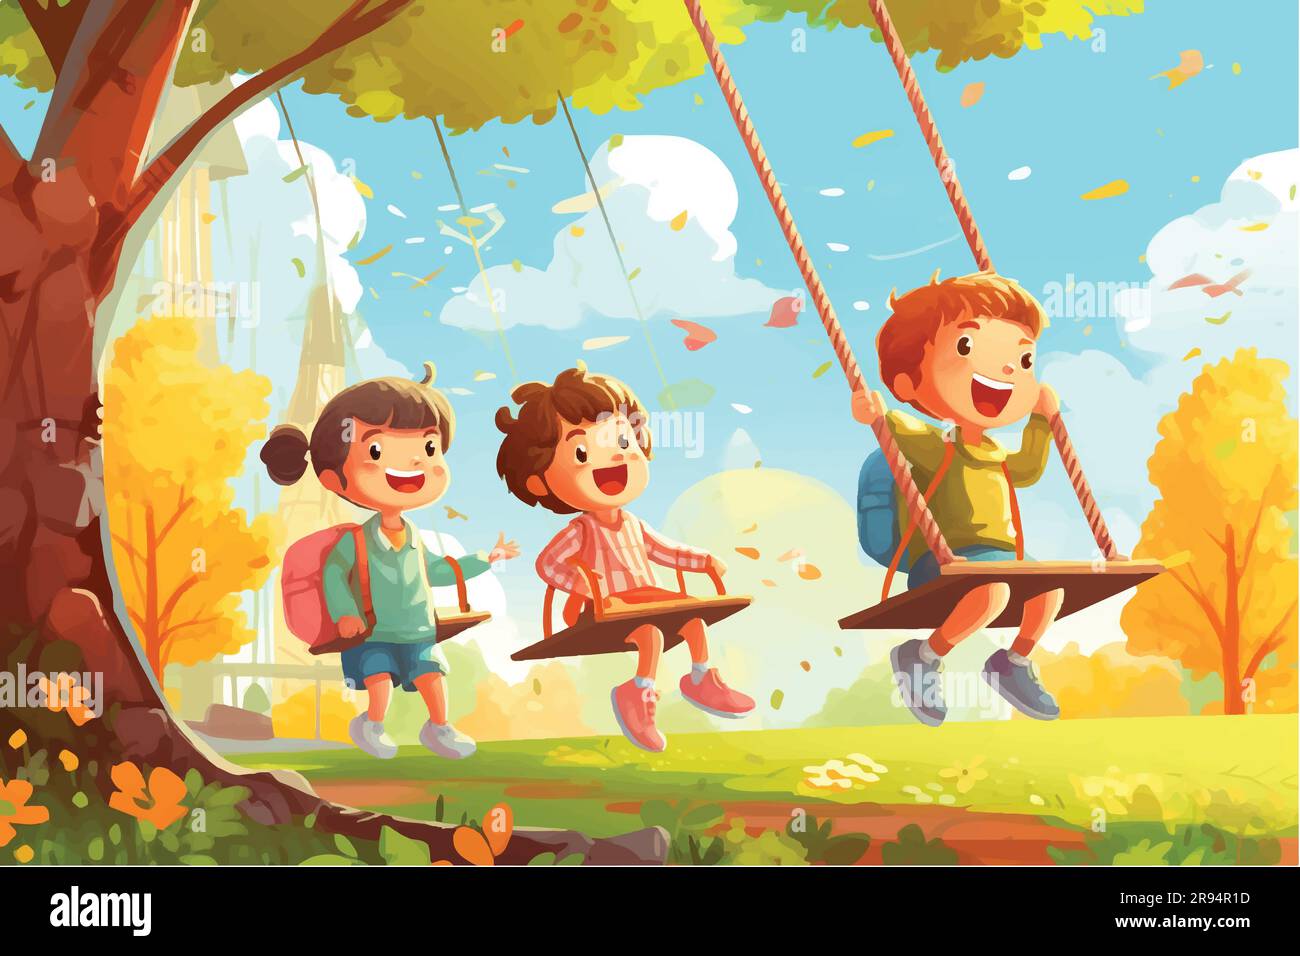 vector illustration of Happy Children Playing Outside Stock Vector